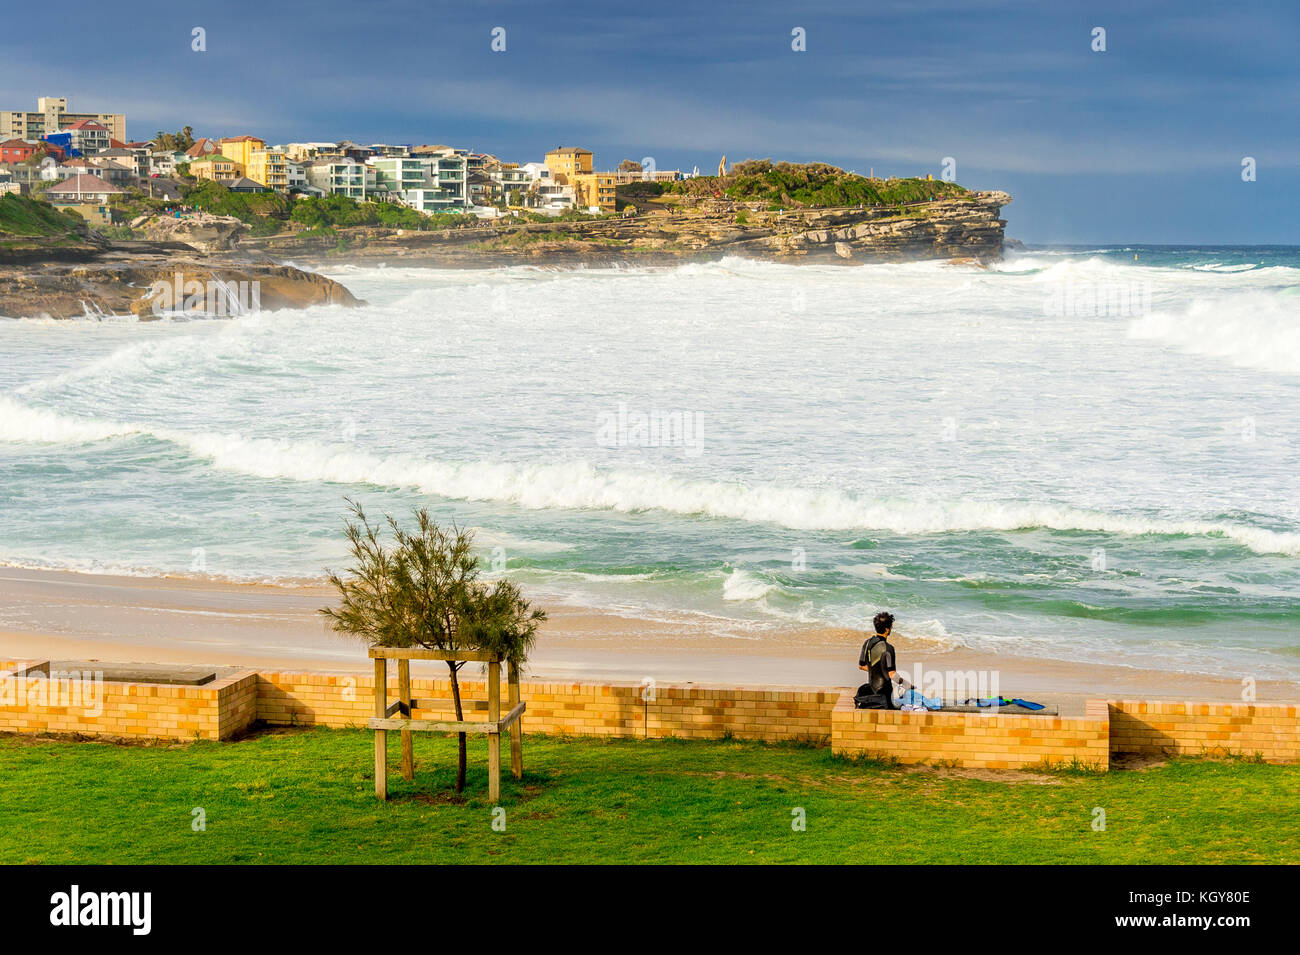 A surfer prepares while watching massive surf conditions at Bronte Beach in Sydney, NSW, Australia Stock Photo